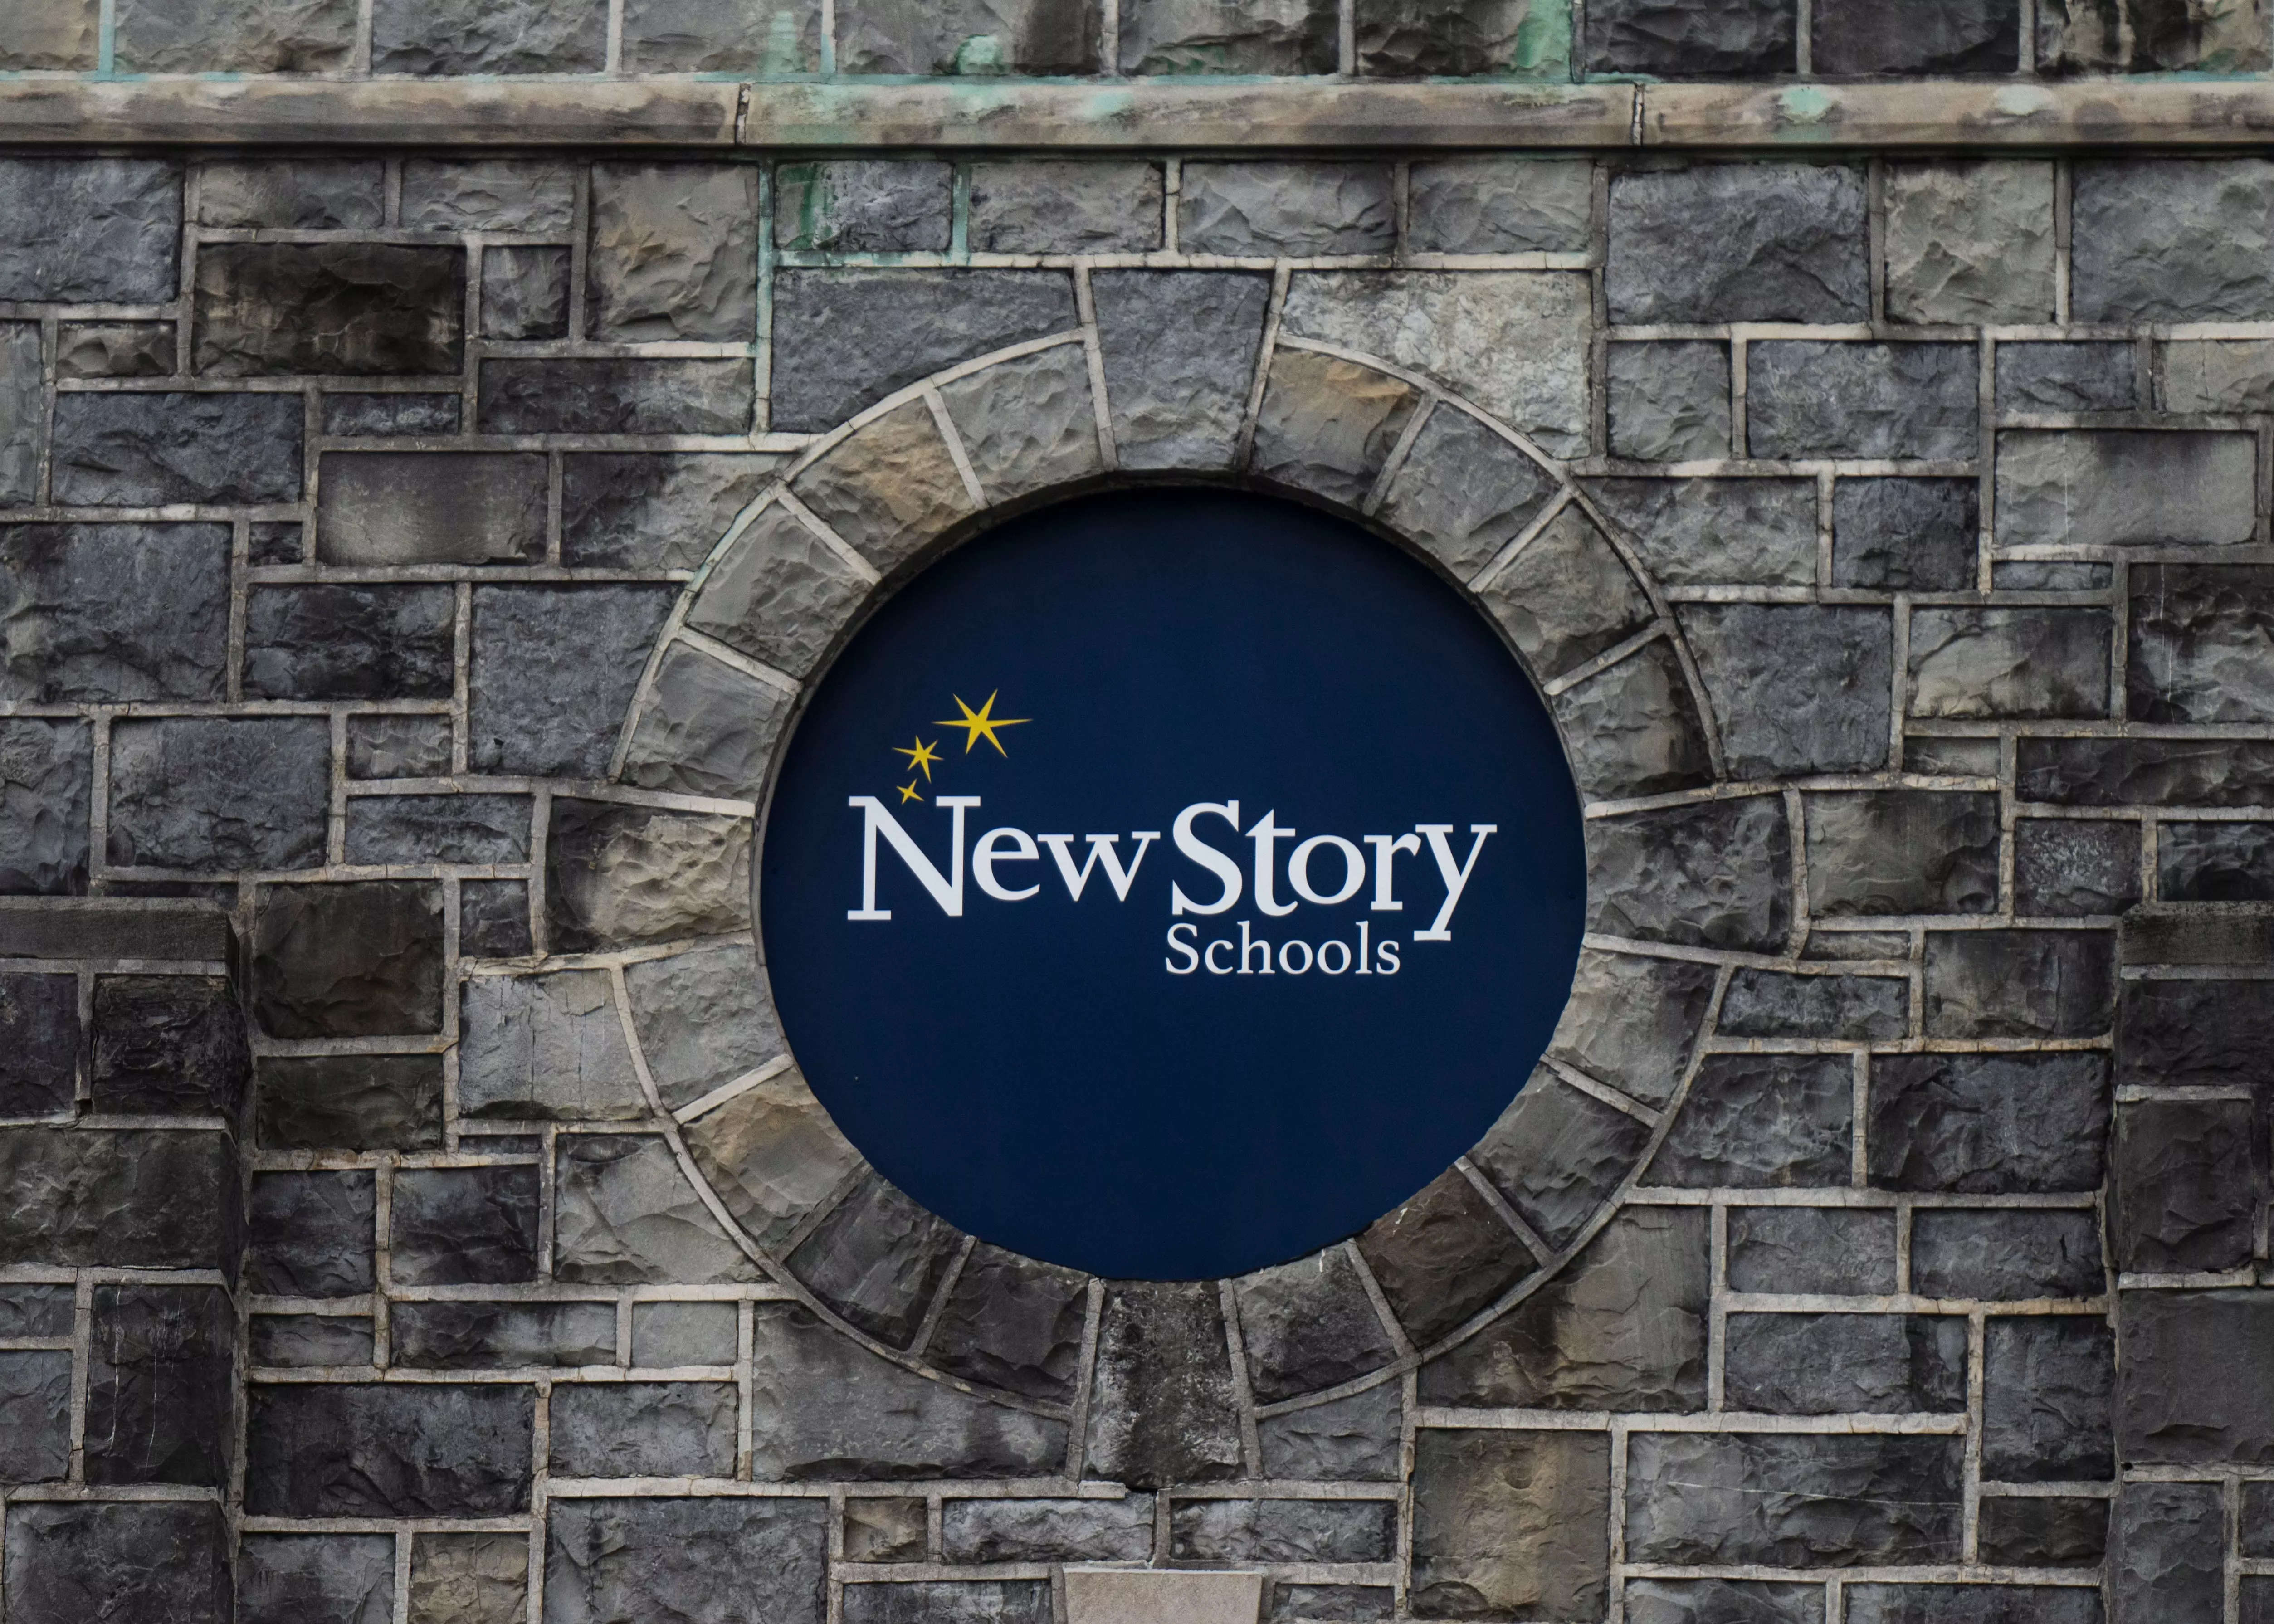 School sign on stone building for New Story Schools.